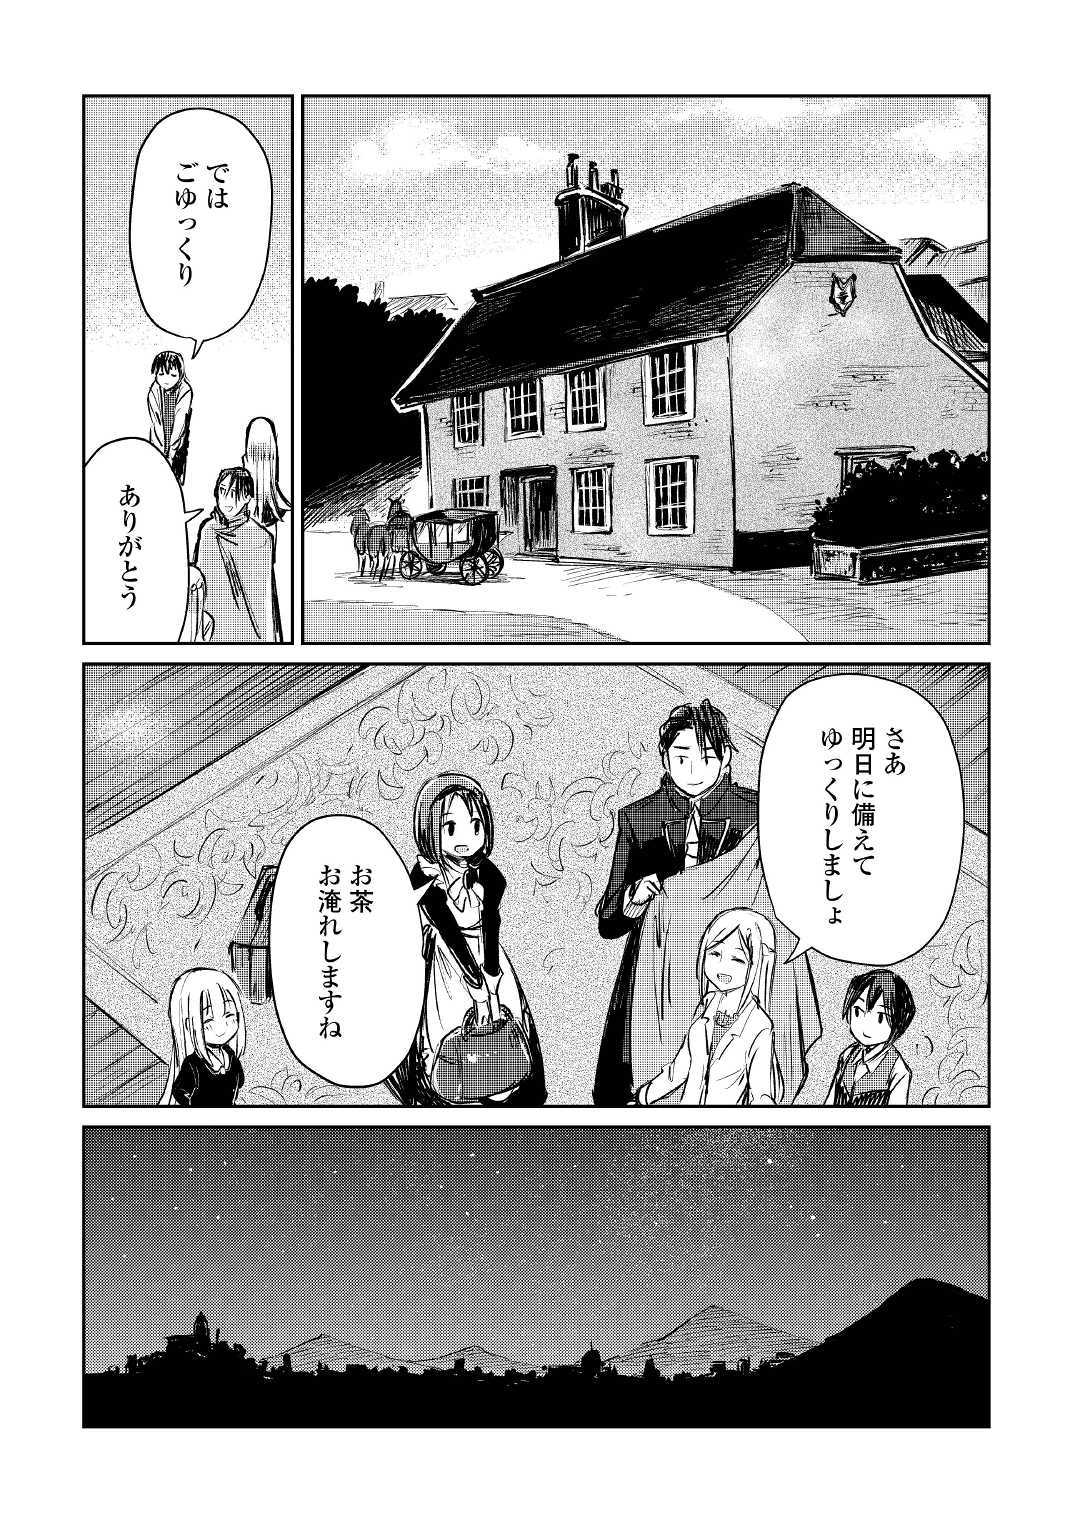 The Former Structural Researcher’s Story of Otherworldly Adventure 第8話 - Page 9